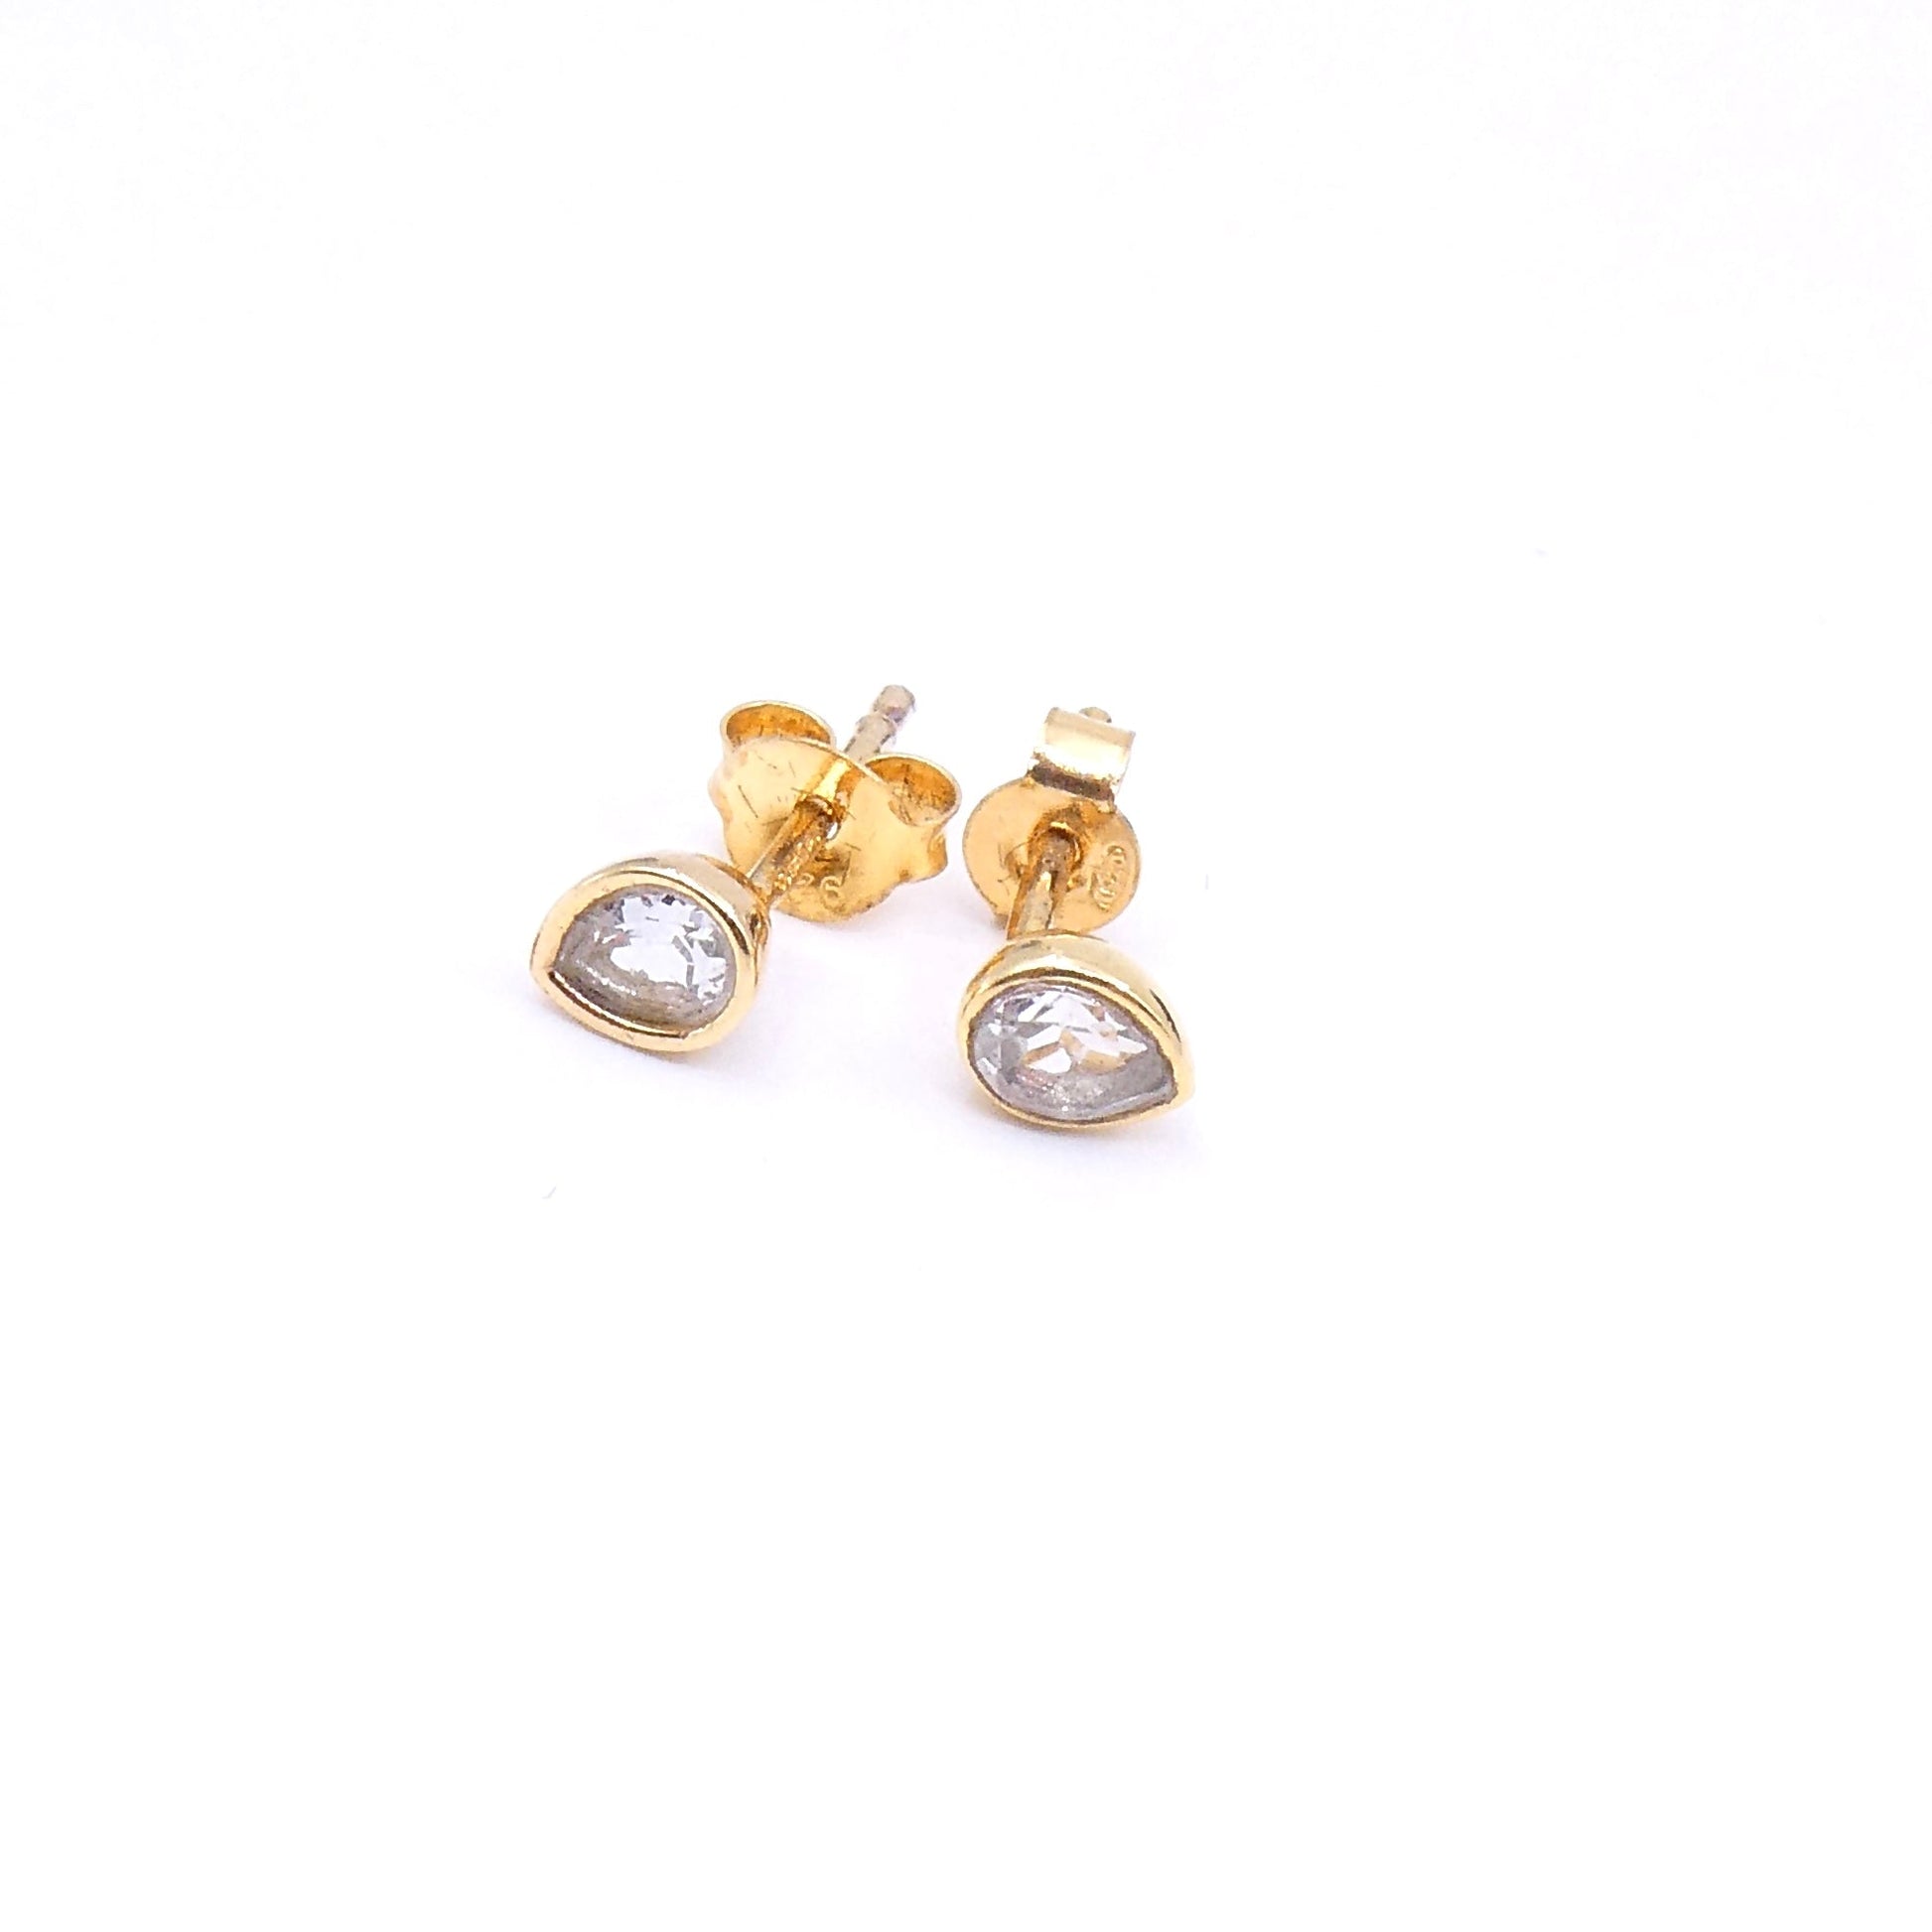 White topaz studs, pear shaped gold plated studs. - Collected